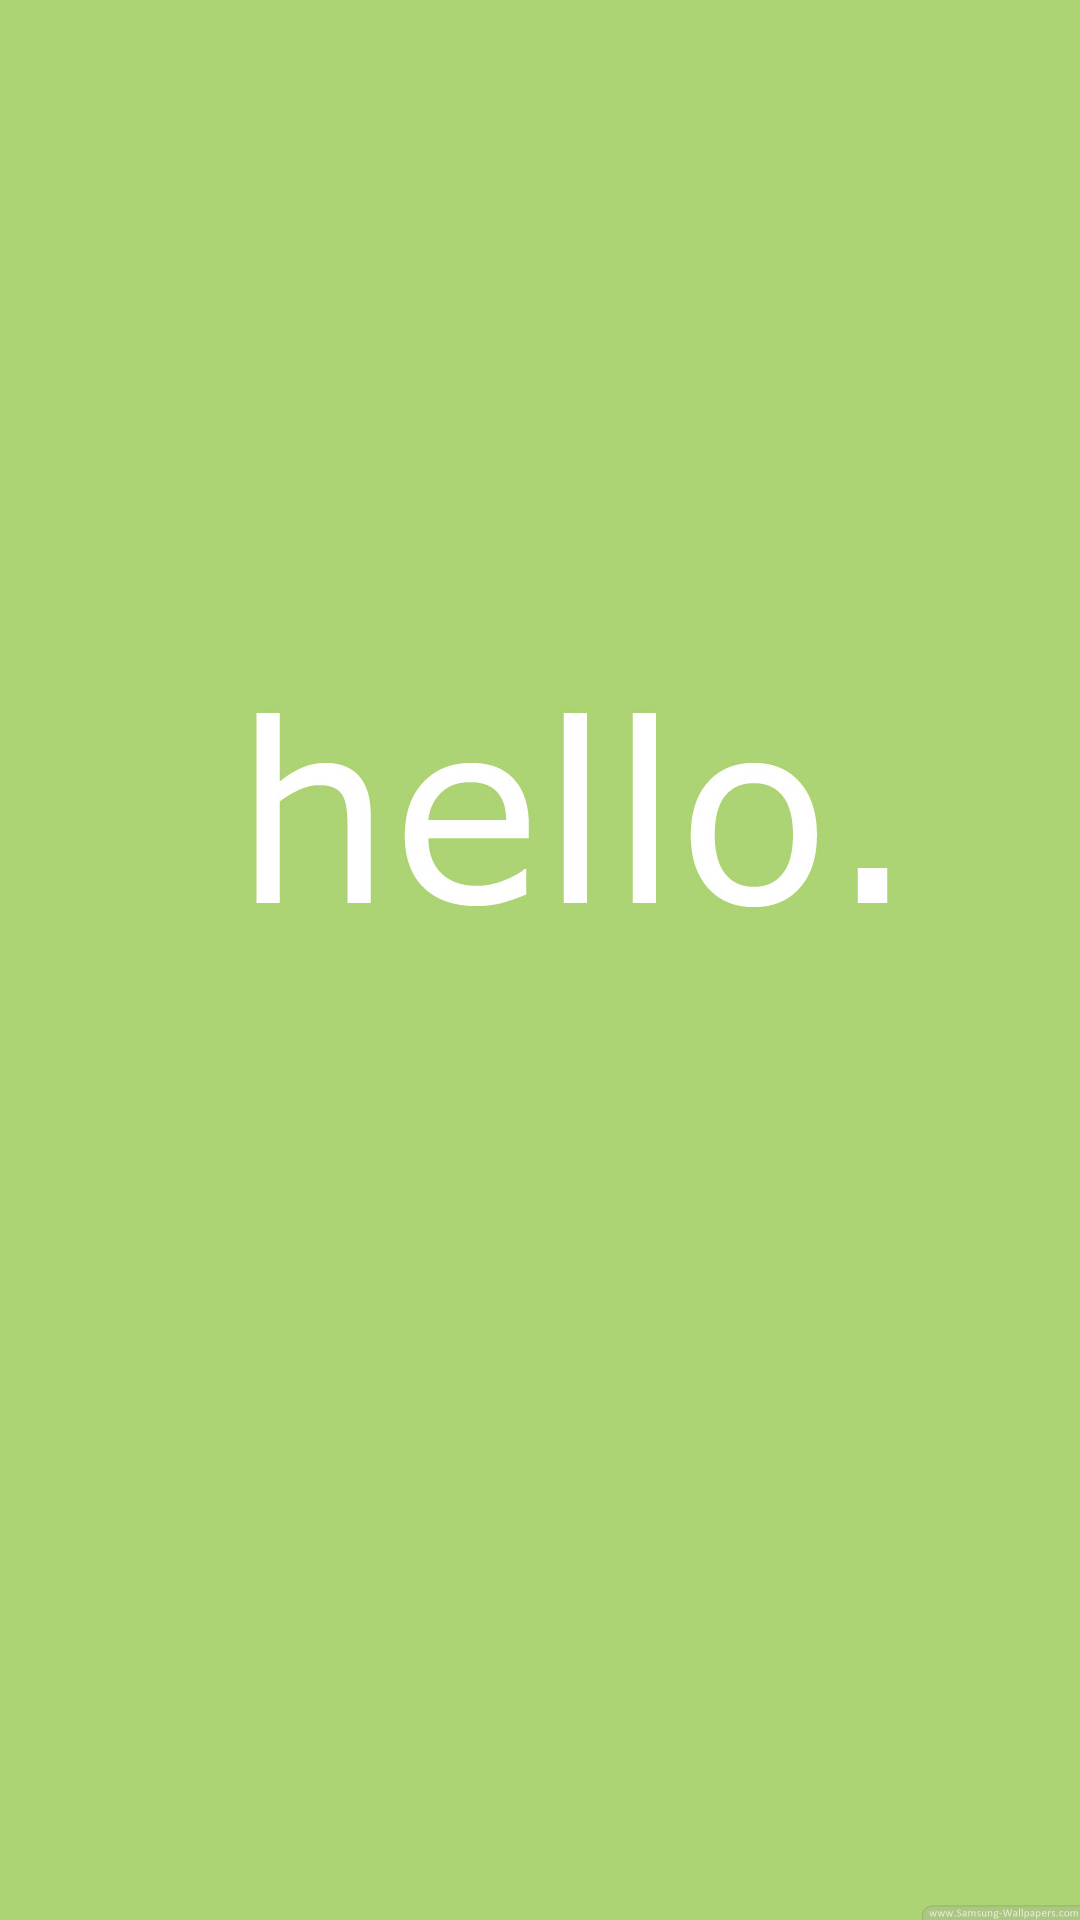 Cute Simple Hello Message Android Wallpaper